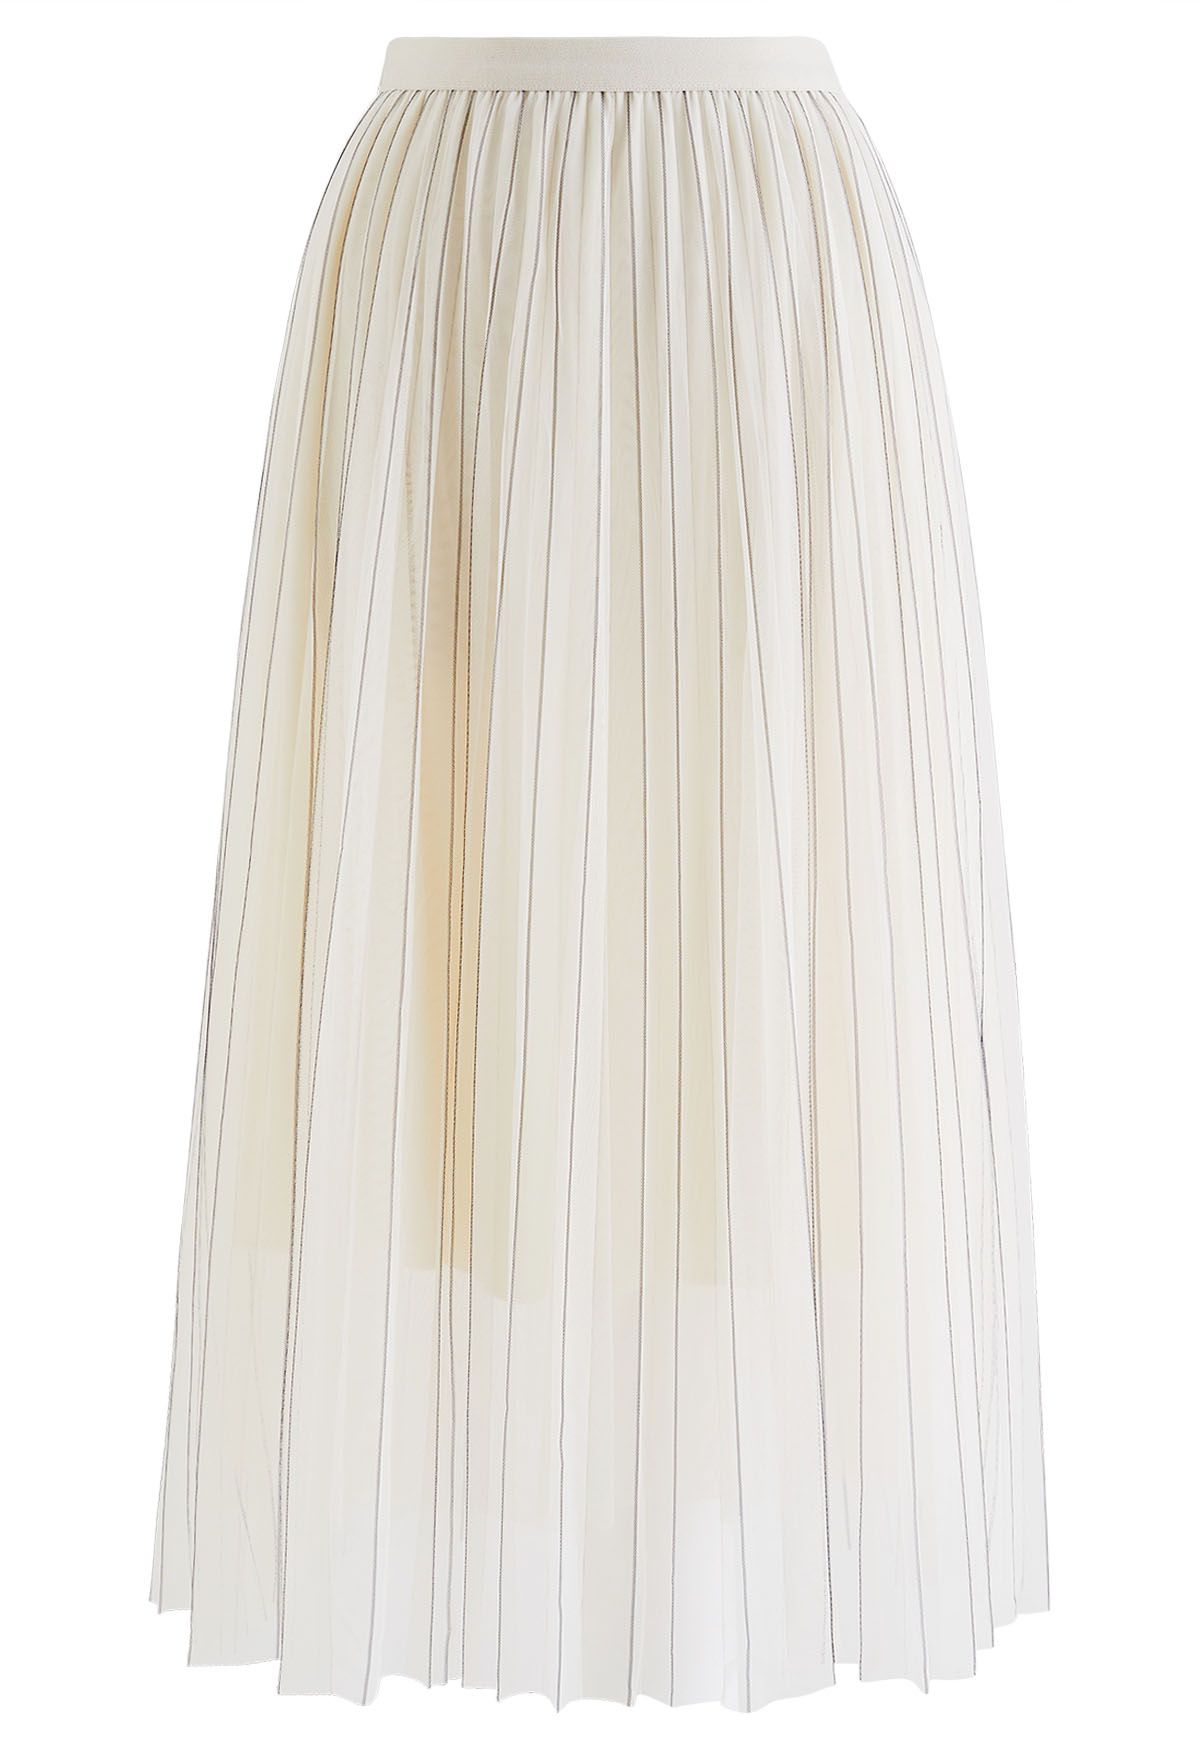 Contrast Lines Pleated Mesh Tulle Midi Skirt in Cream